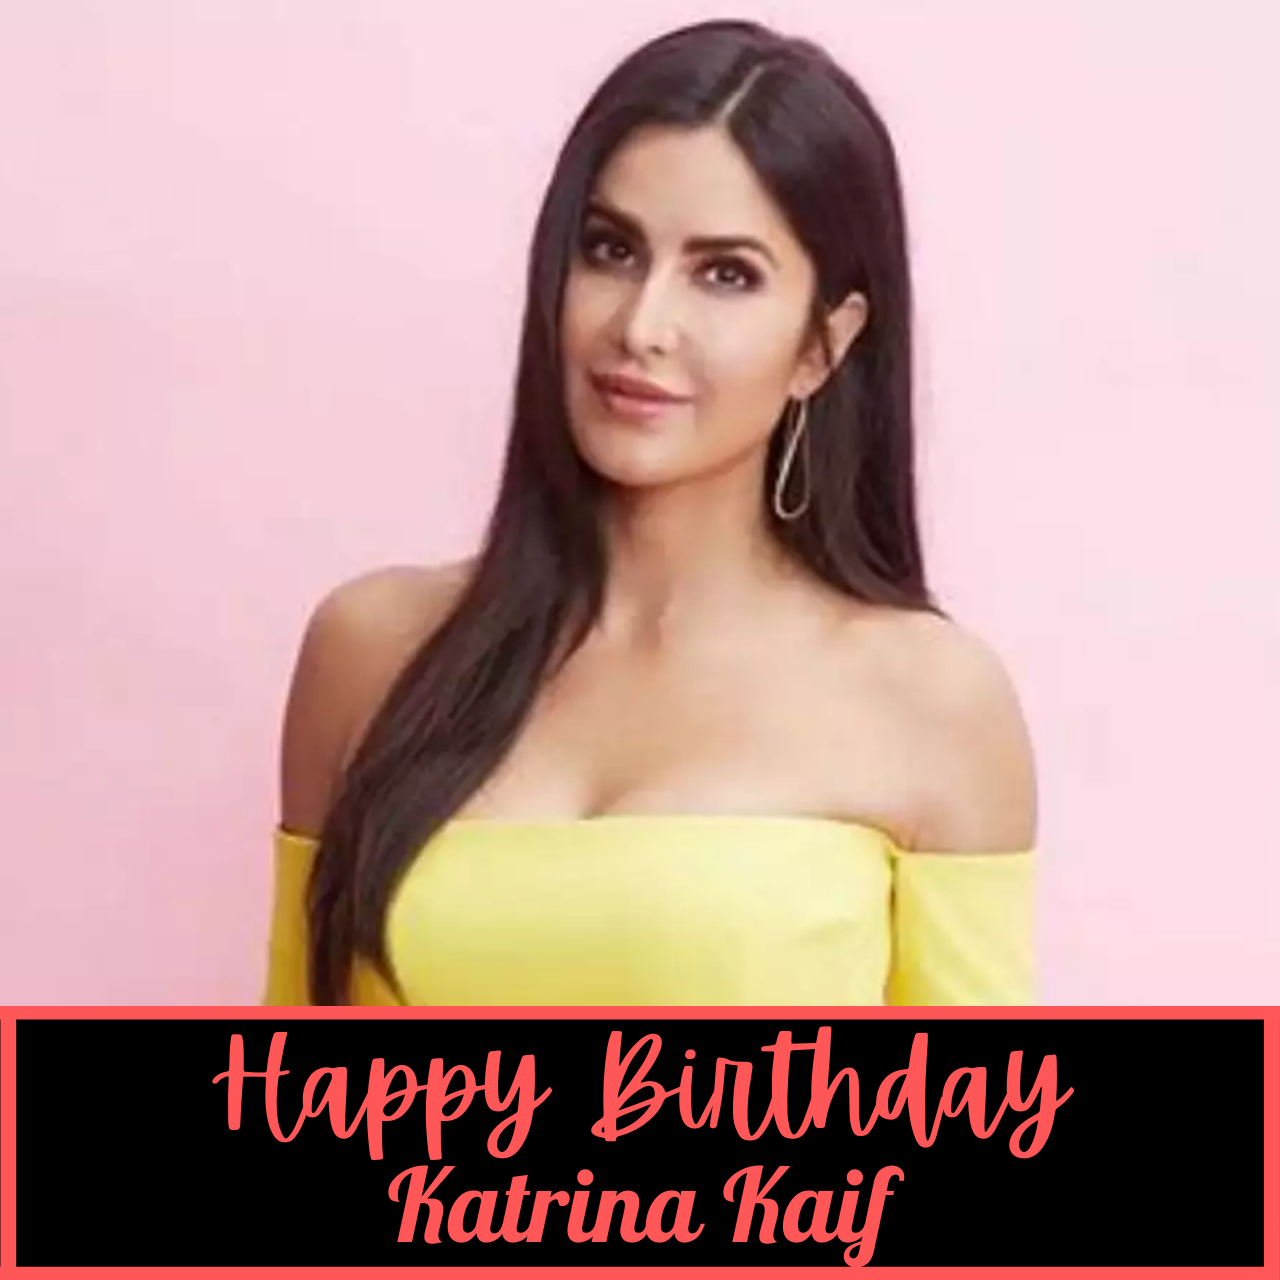 Happy Birthday, Katrina Kaif: Wishes, Images, Messages, Gif, Meme and WhatsApp Status Video to greet "Kat"